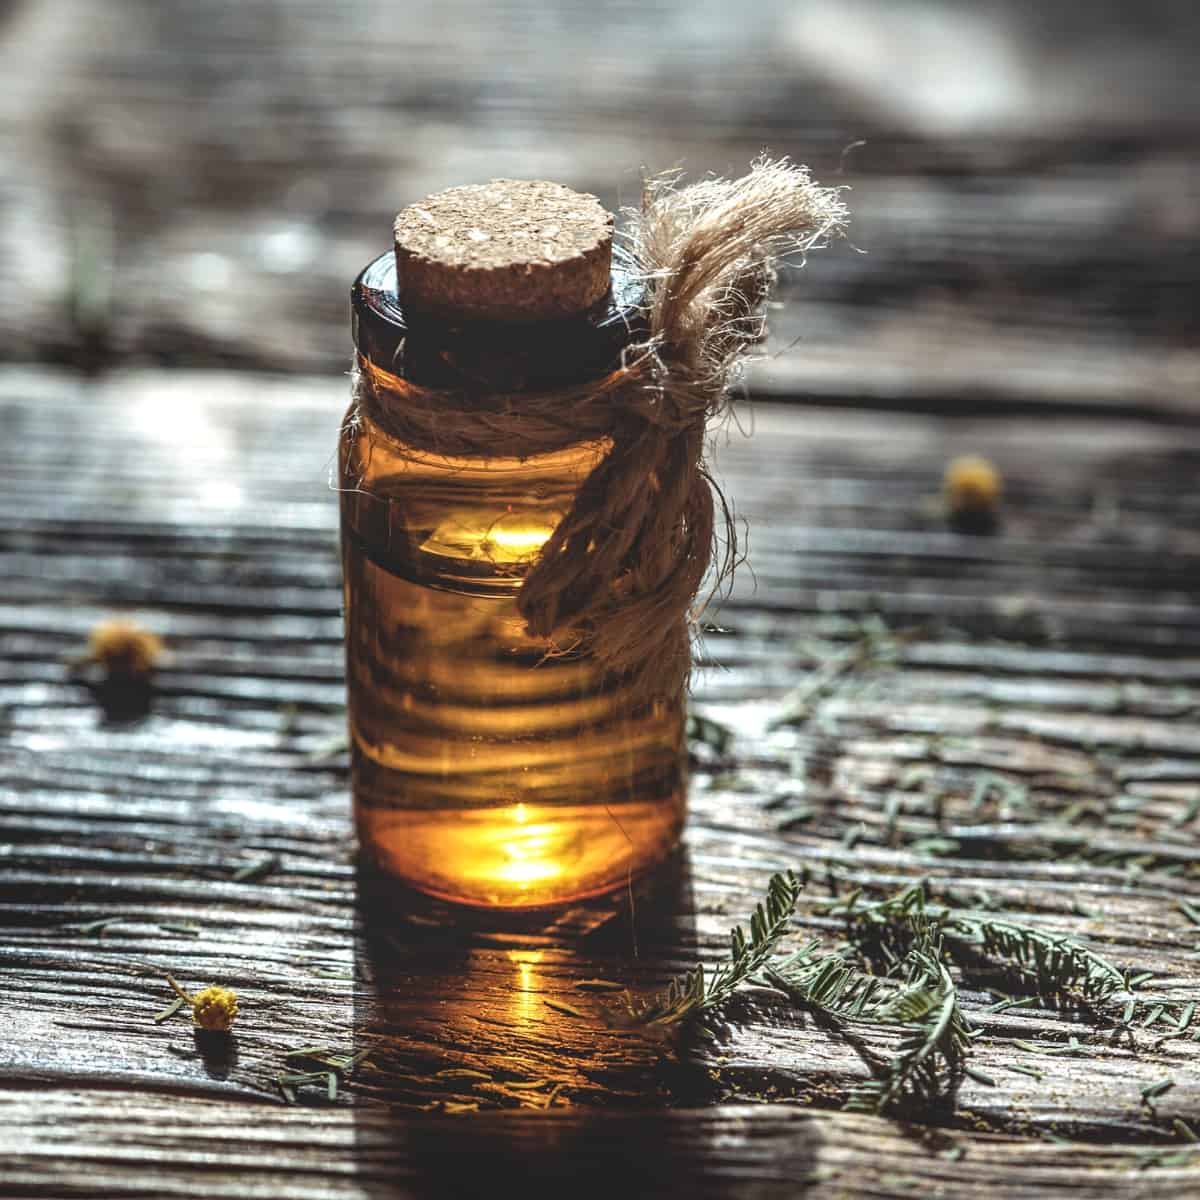 A small clear glass of essential oil resting on a wooden table.